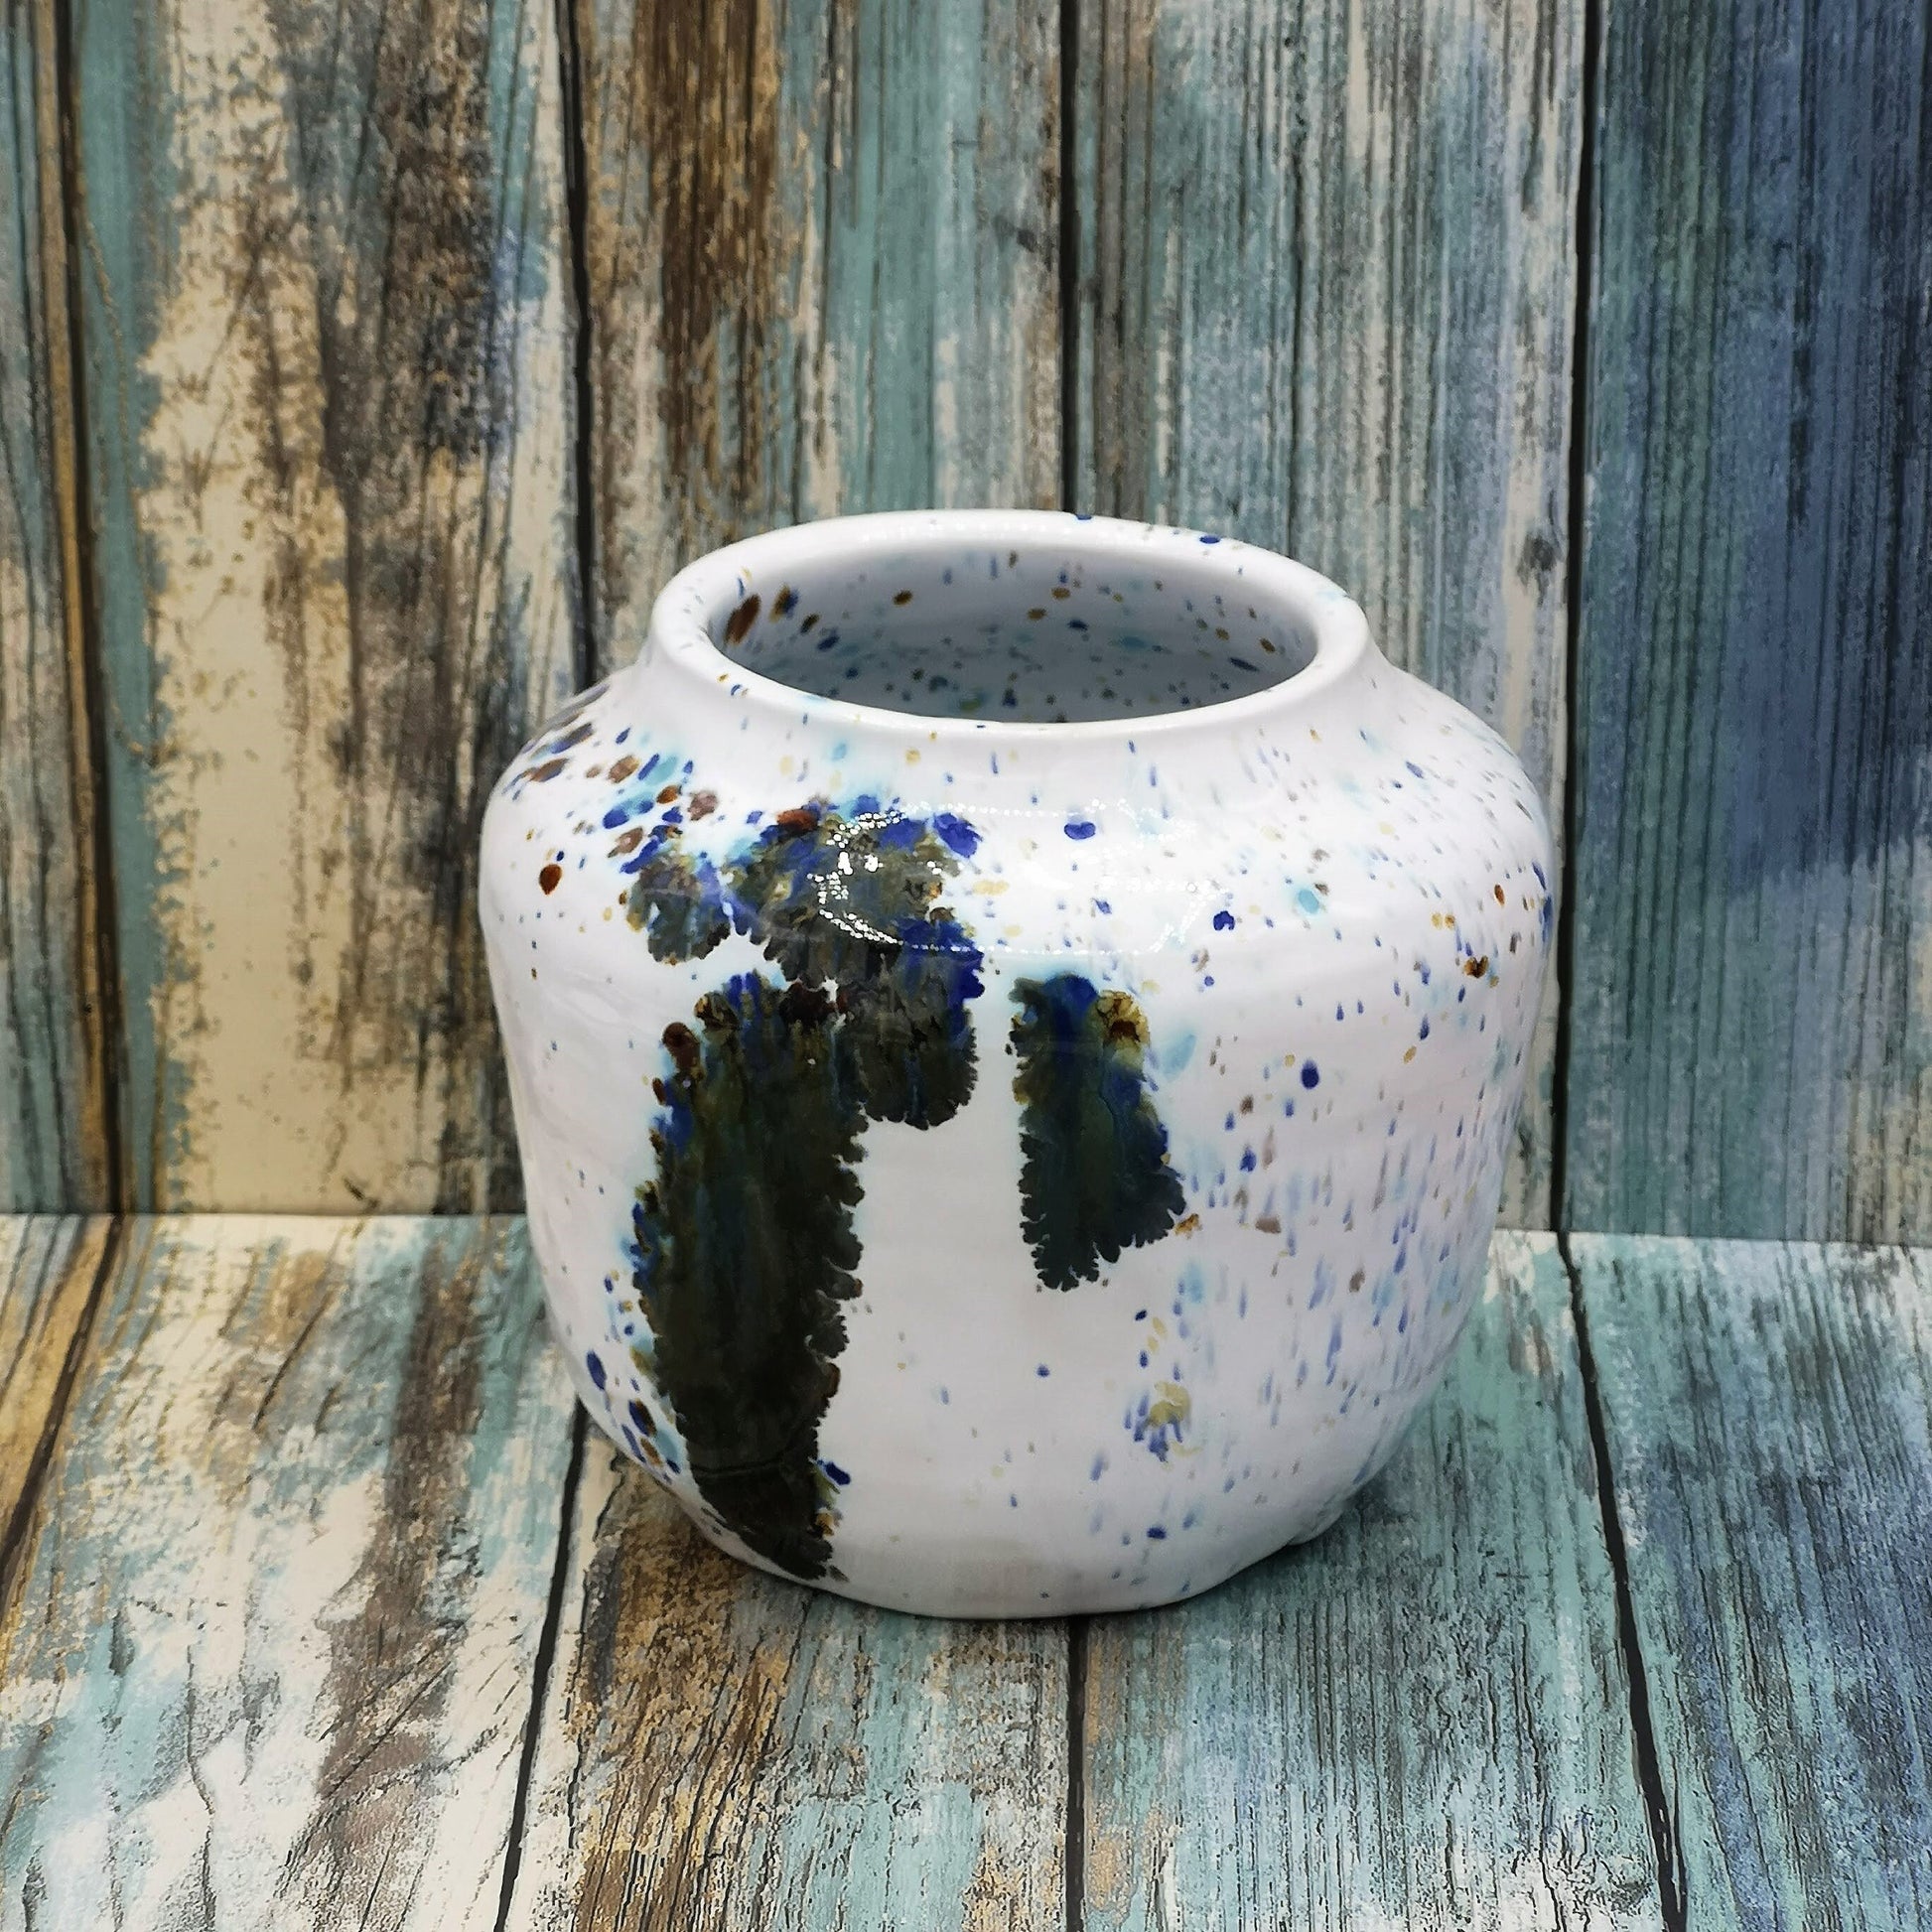 Handmade Ceramic Bud Vase, Speckled Modern Pottery Vase For Flowers, Unique House Warming Gifts For Couple, Custom Wedding Gift - Ceramica Ana Rafael